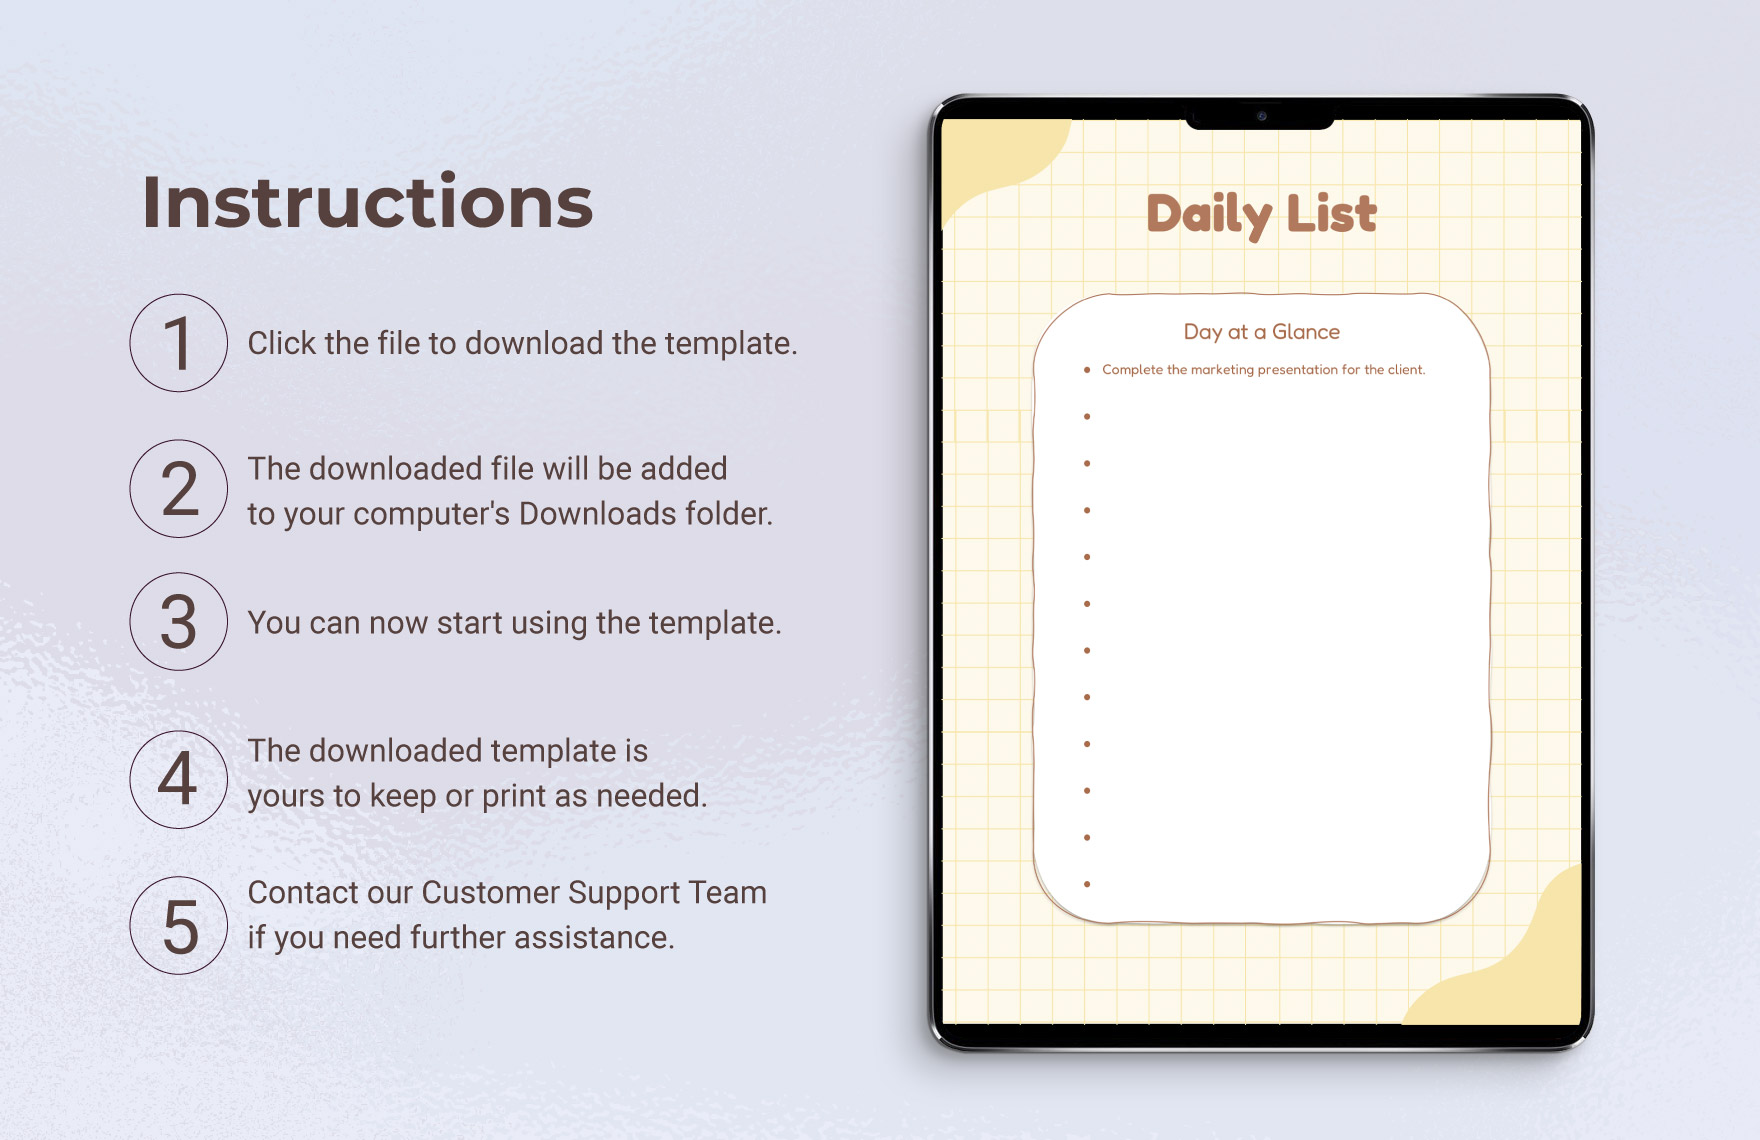 Daily List Template